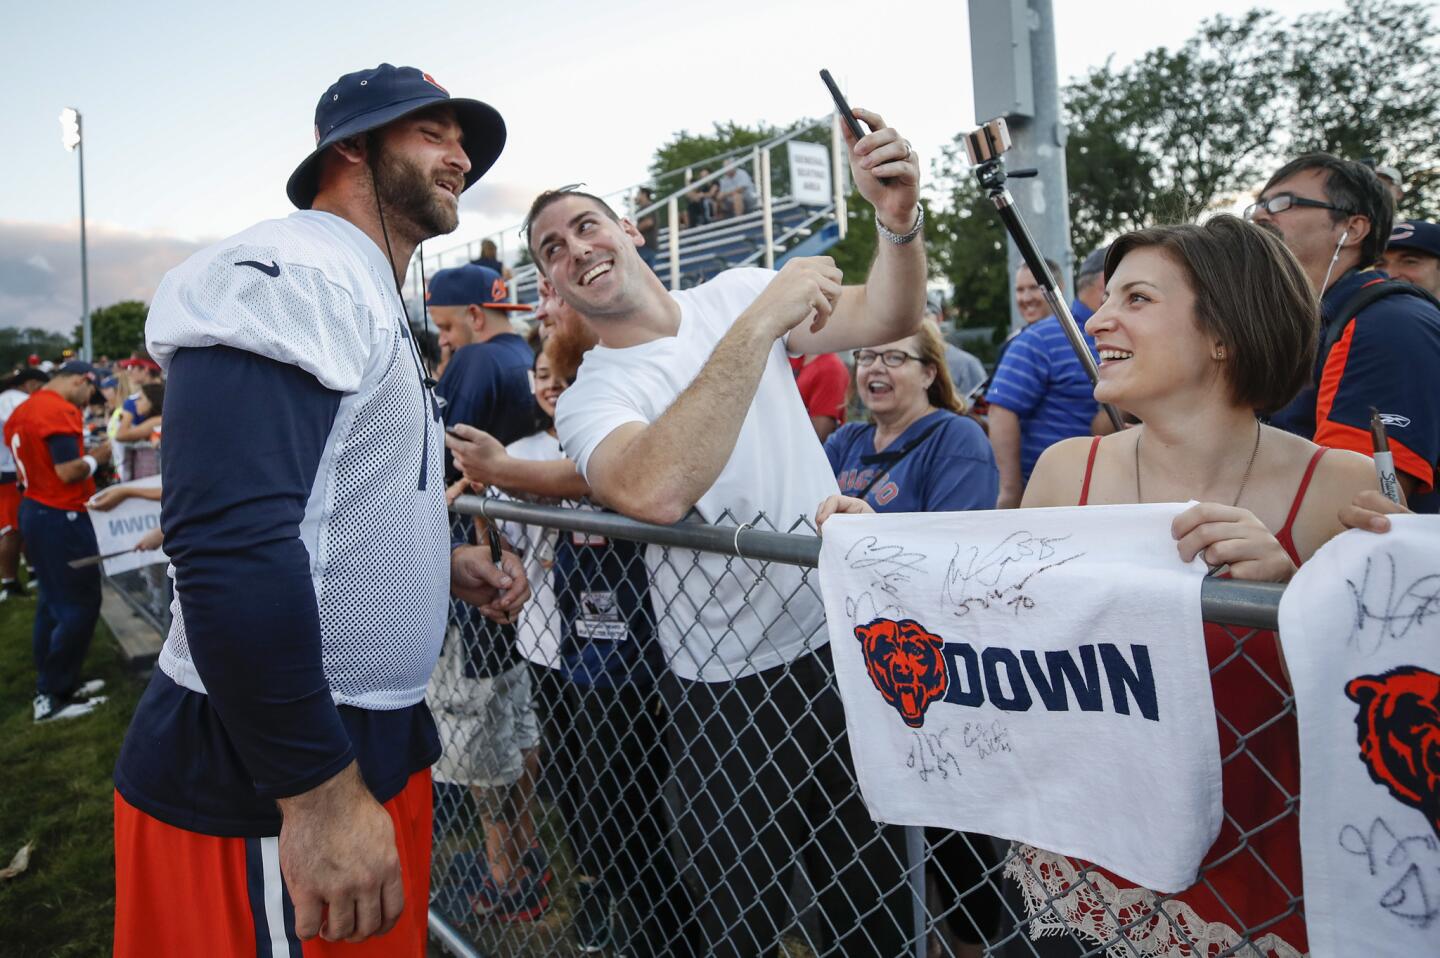 Kyle Long poses for a picture after practice at Prospect High School in Mount Prospect on Aug. 17, 2017.